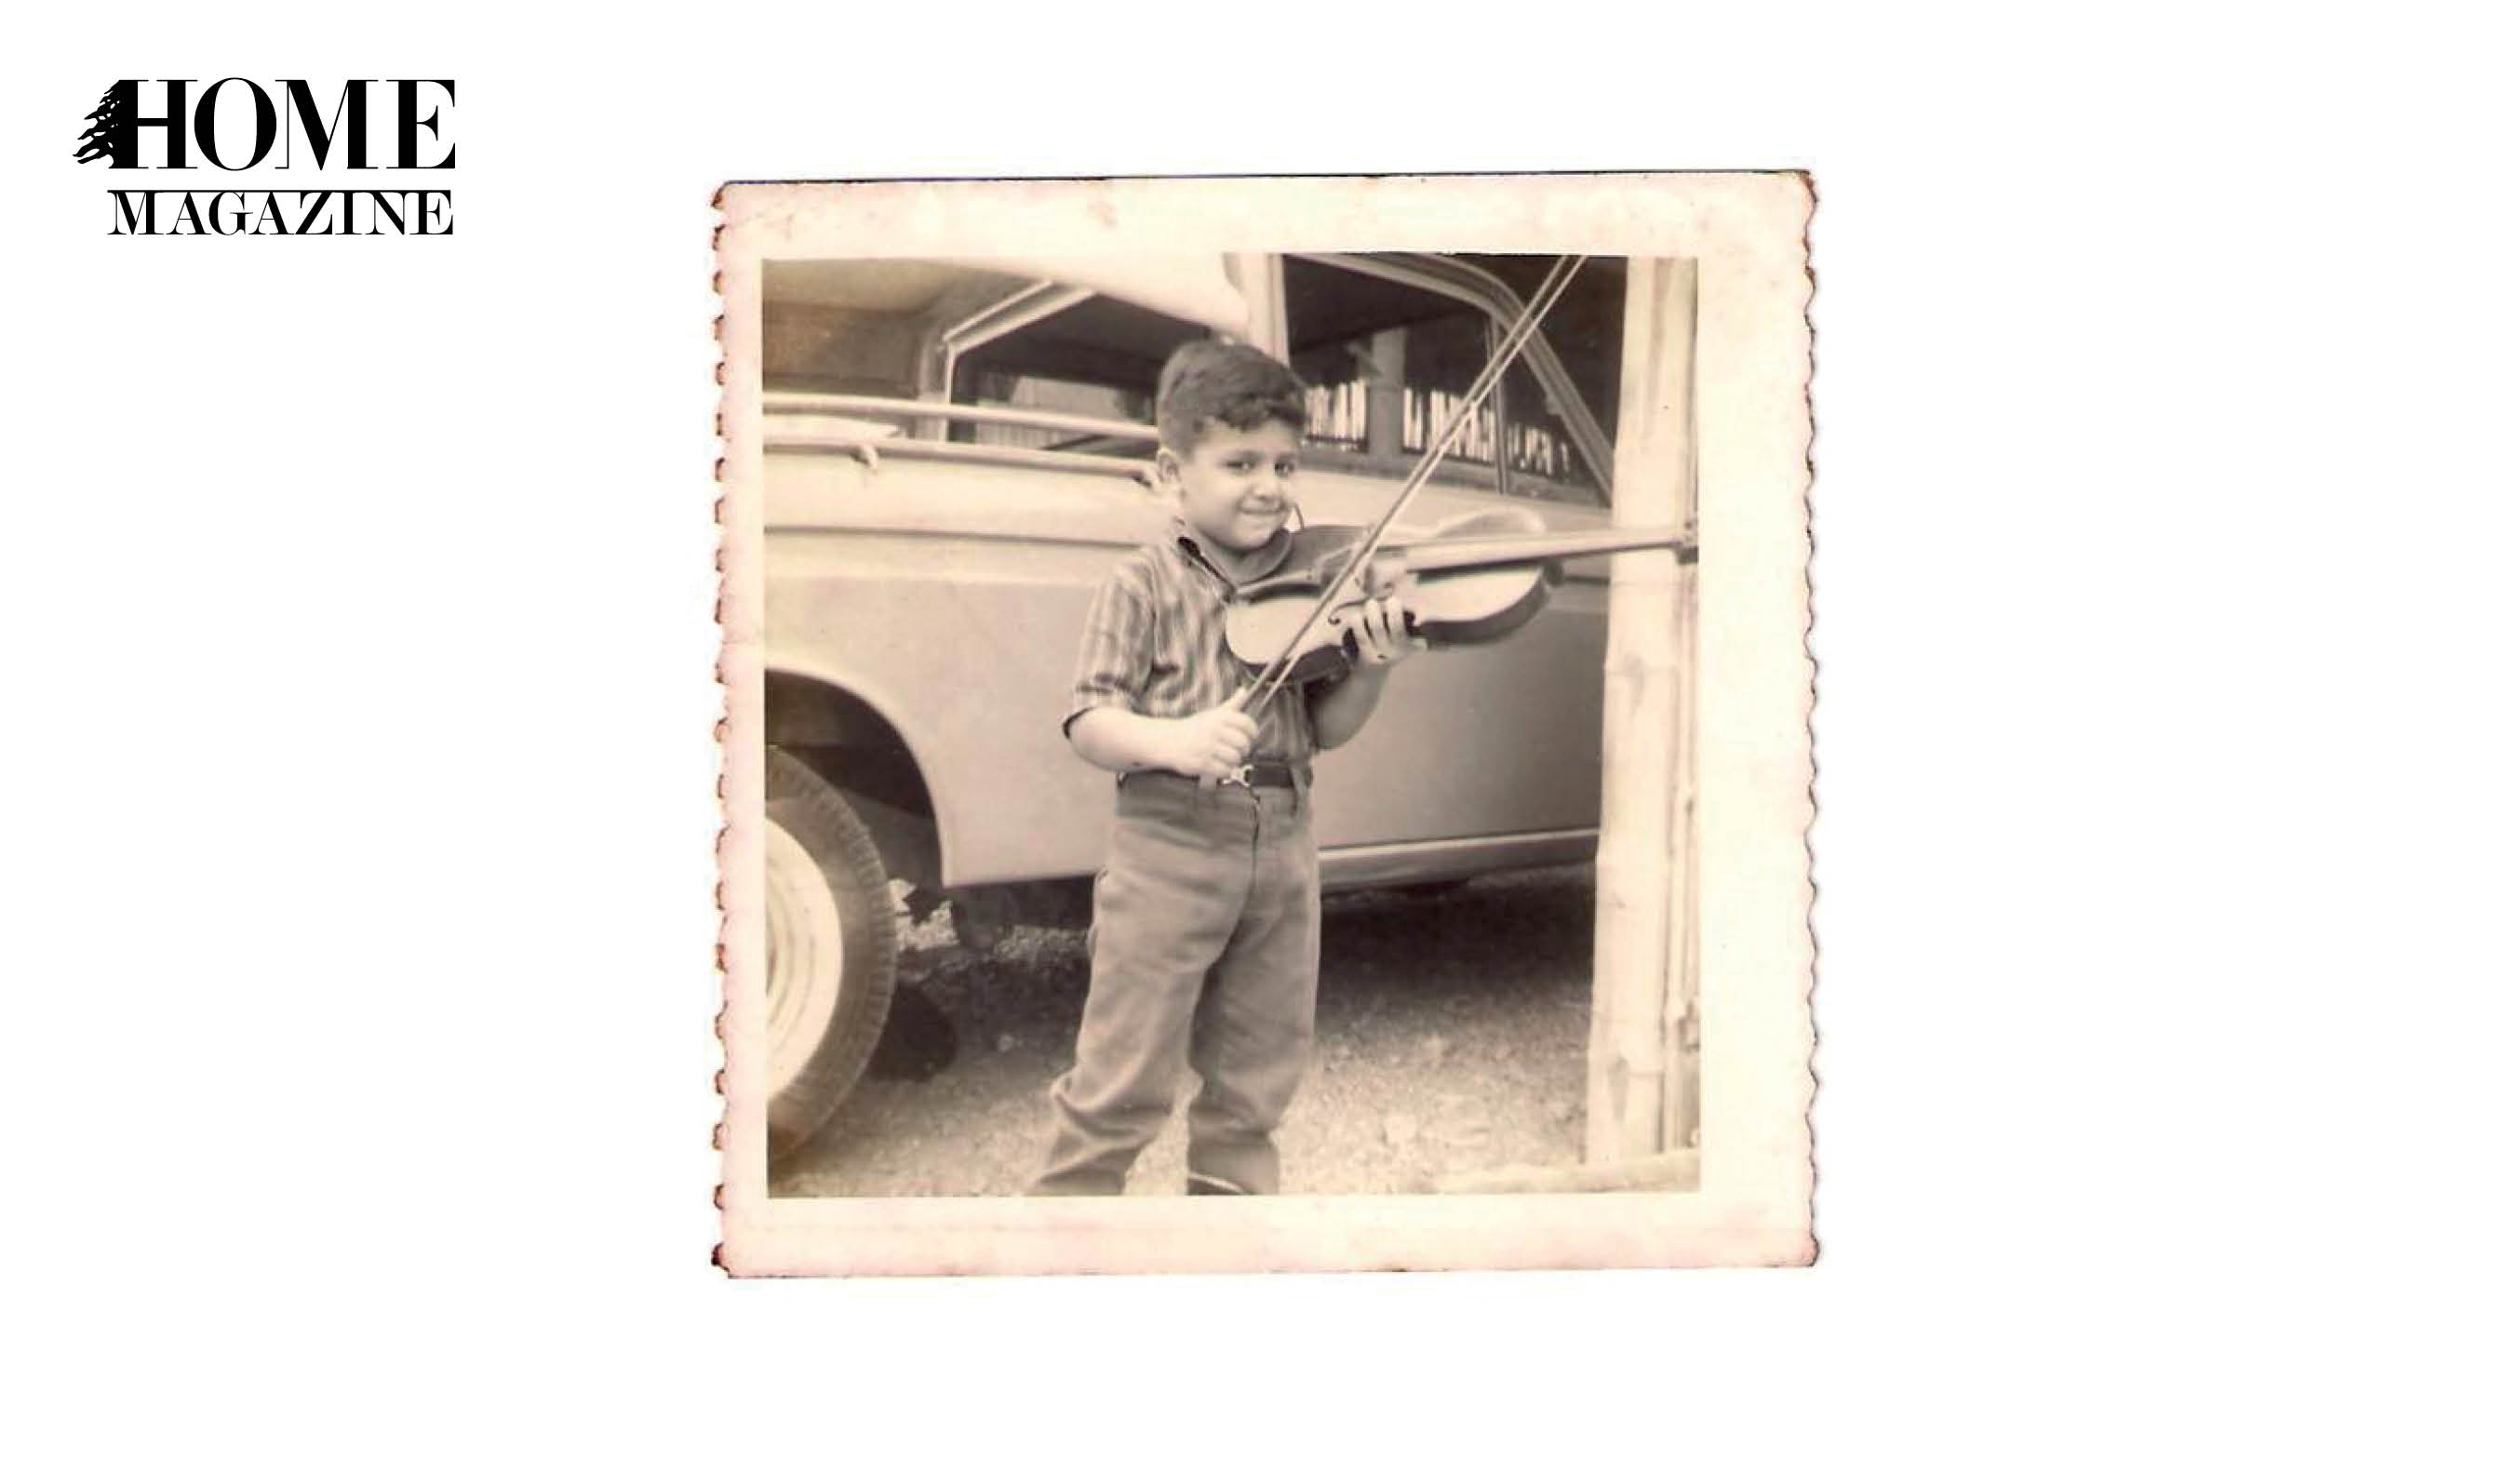 Litlle boy playing violin with a car in the background